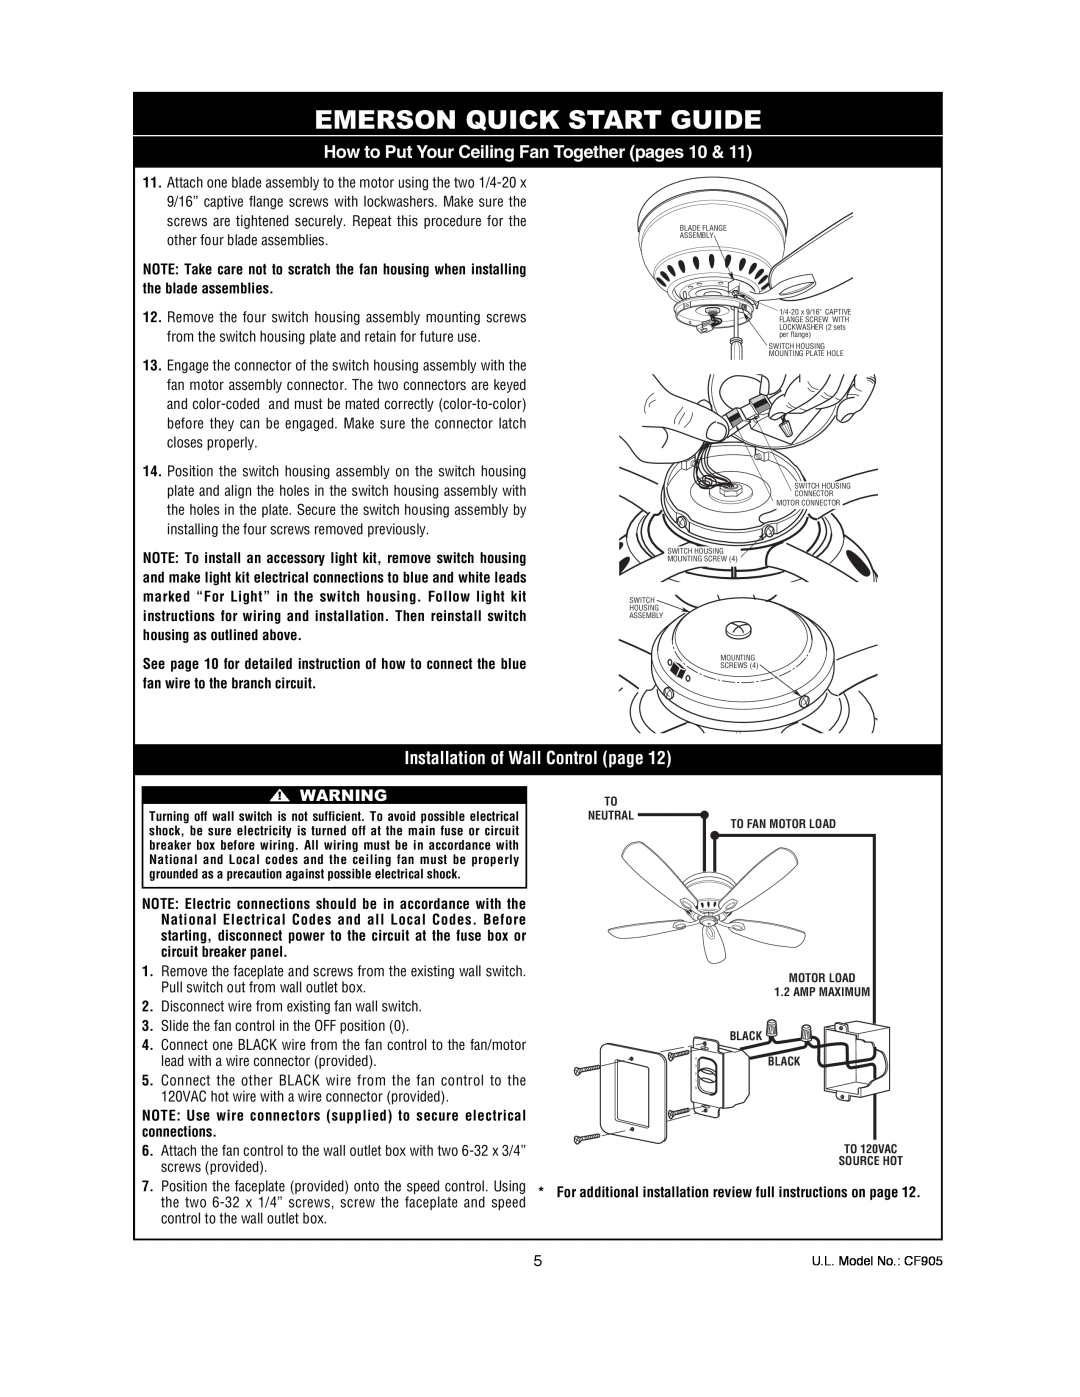 Emerson CF905GES00, CF905BS00, CF905VNB00 How to Put Your Ceiling Fan Together pages, Installation of Wall Control page 